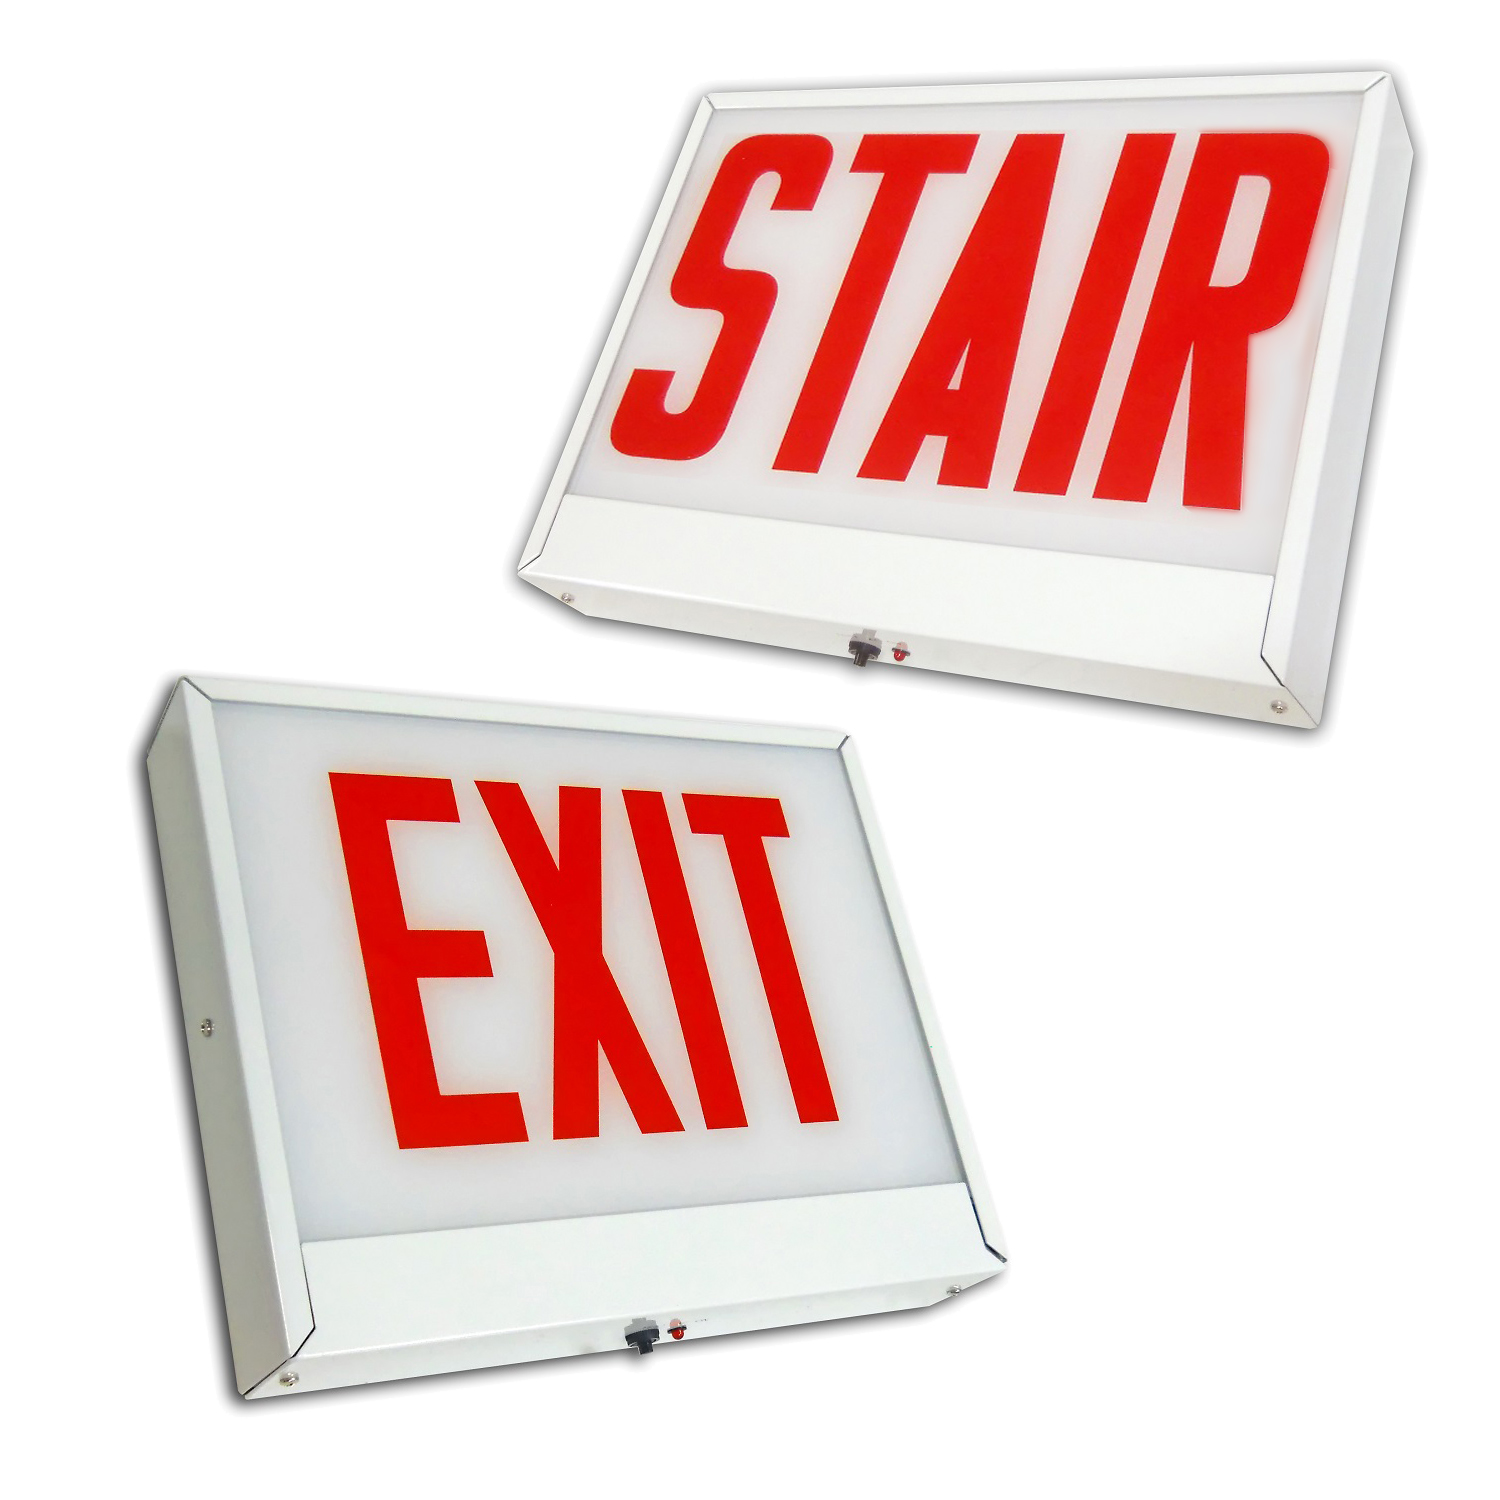 CHICAGO APPROVED STEEL EXIT/STAIR SIGN CAXTE